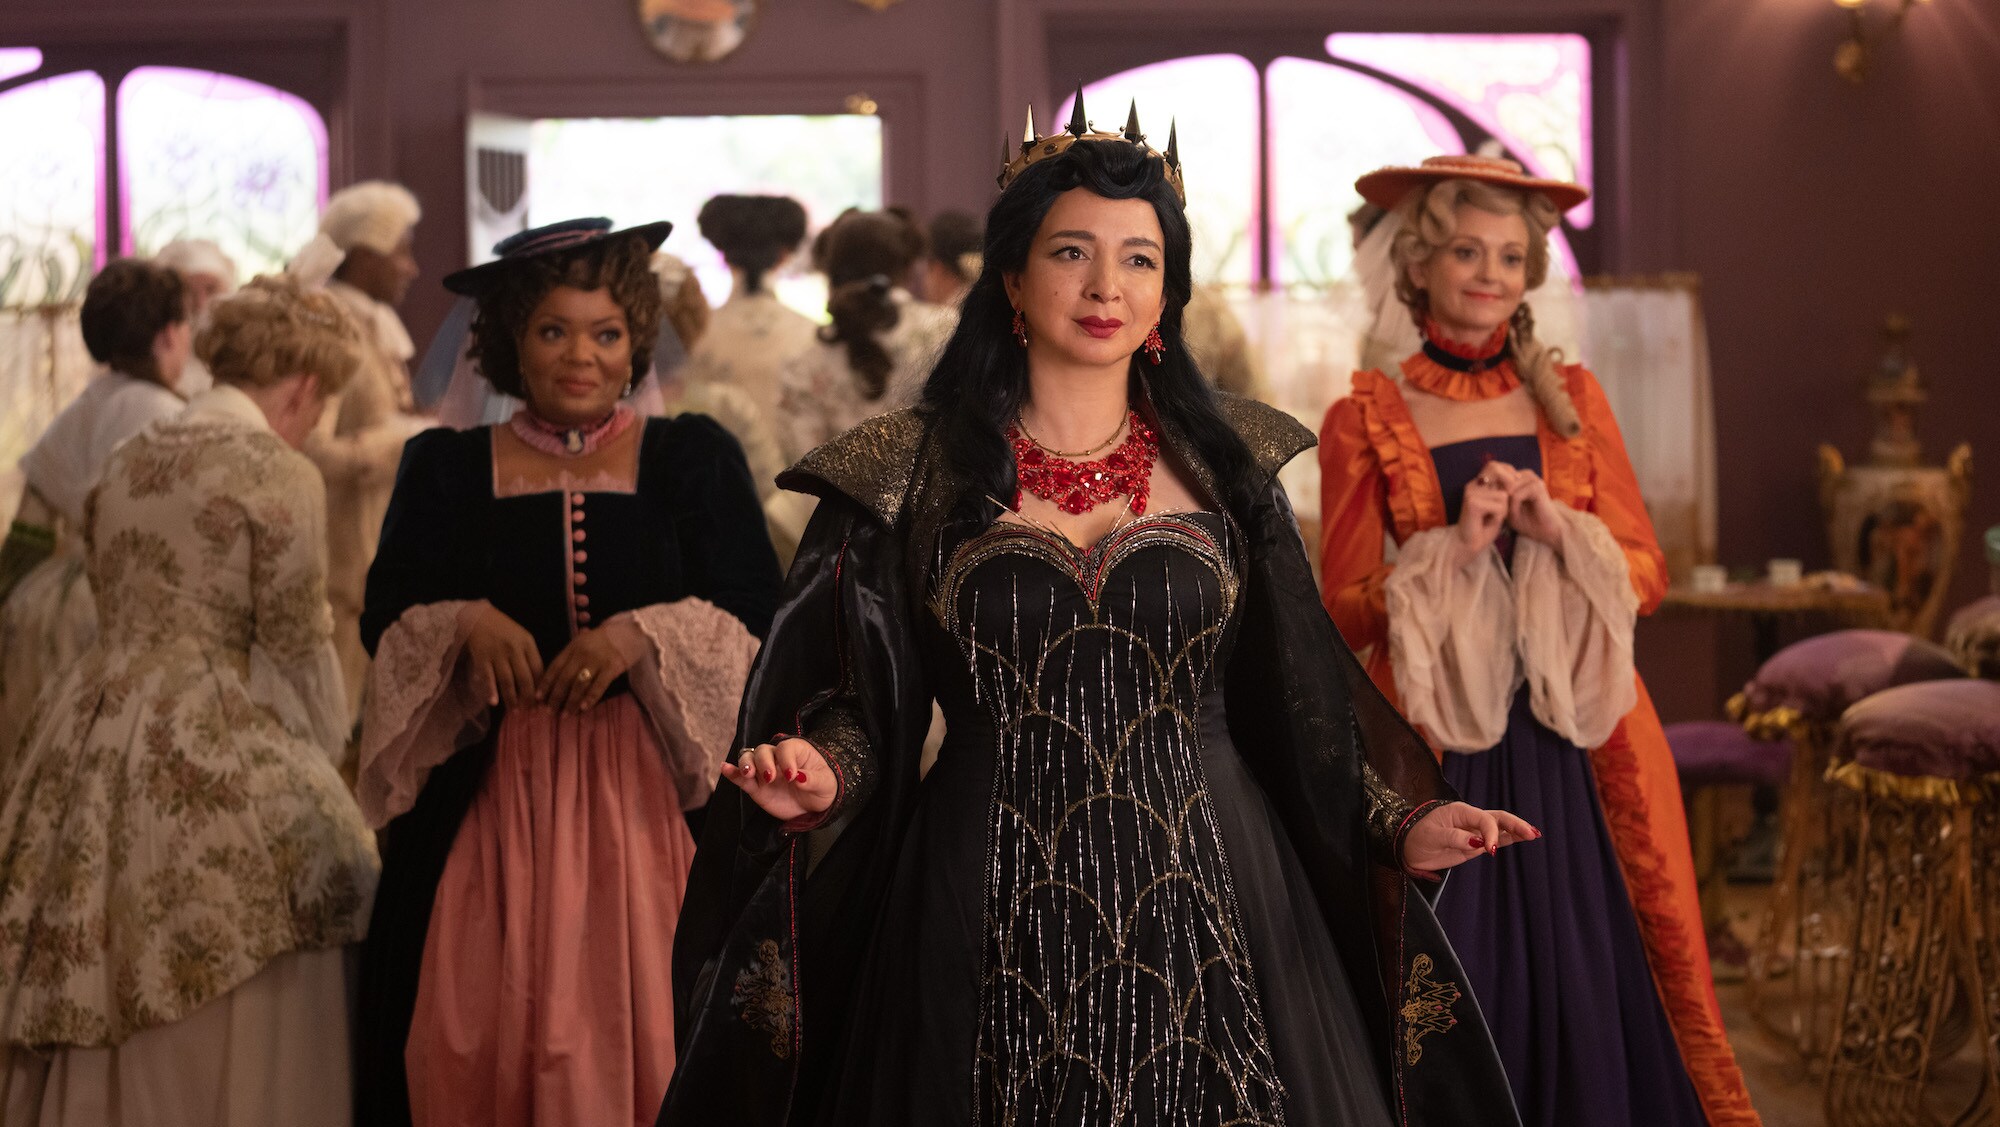 (L-R): Yvette Nicole Brown as Rosaleen, Maya Rudolph as Malvina Monroe, Jayma Mays as Ruby in Disney's live-action DISENCHANTED, exclusively on Disney+. Photo by Jonathan Hession. © 2022 Disney Enterprises, Inc. All Rights Reserved.